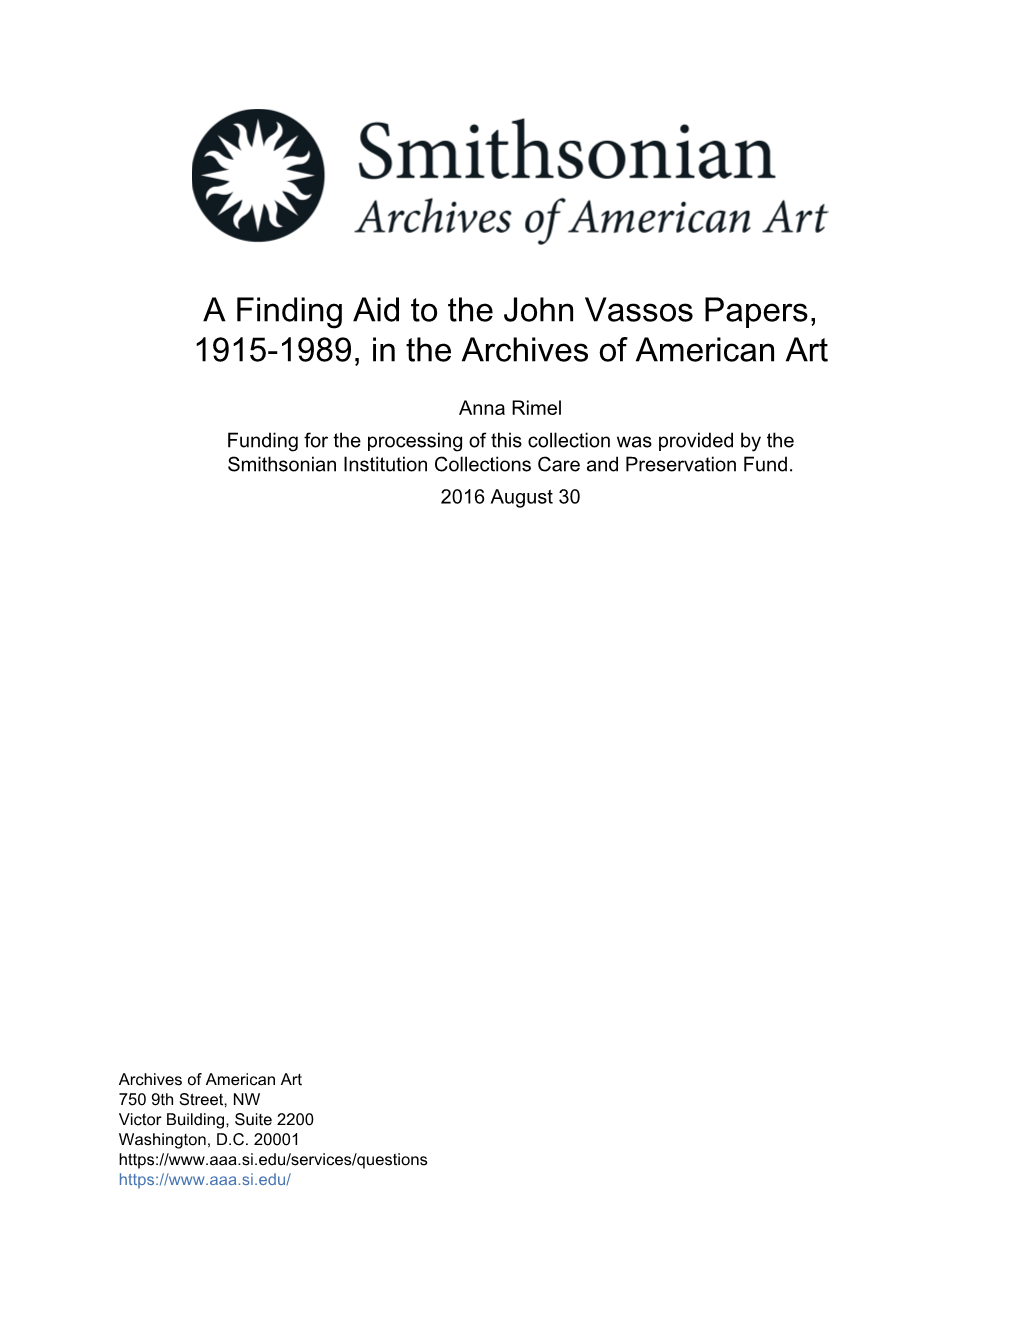 A Finding Aid to the John Vassos Papers, 1915-1989, in the Archives of American Art